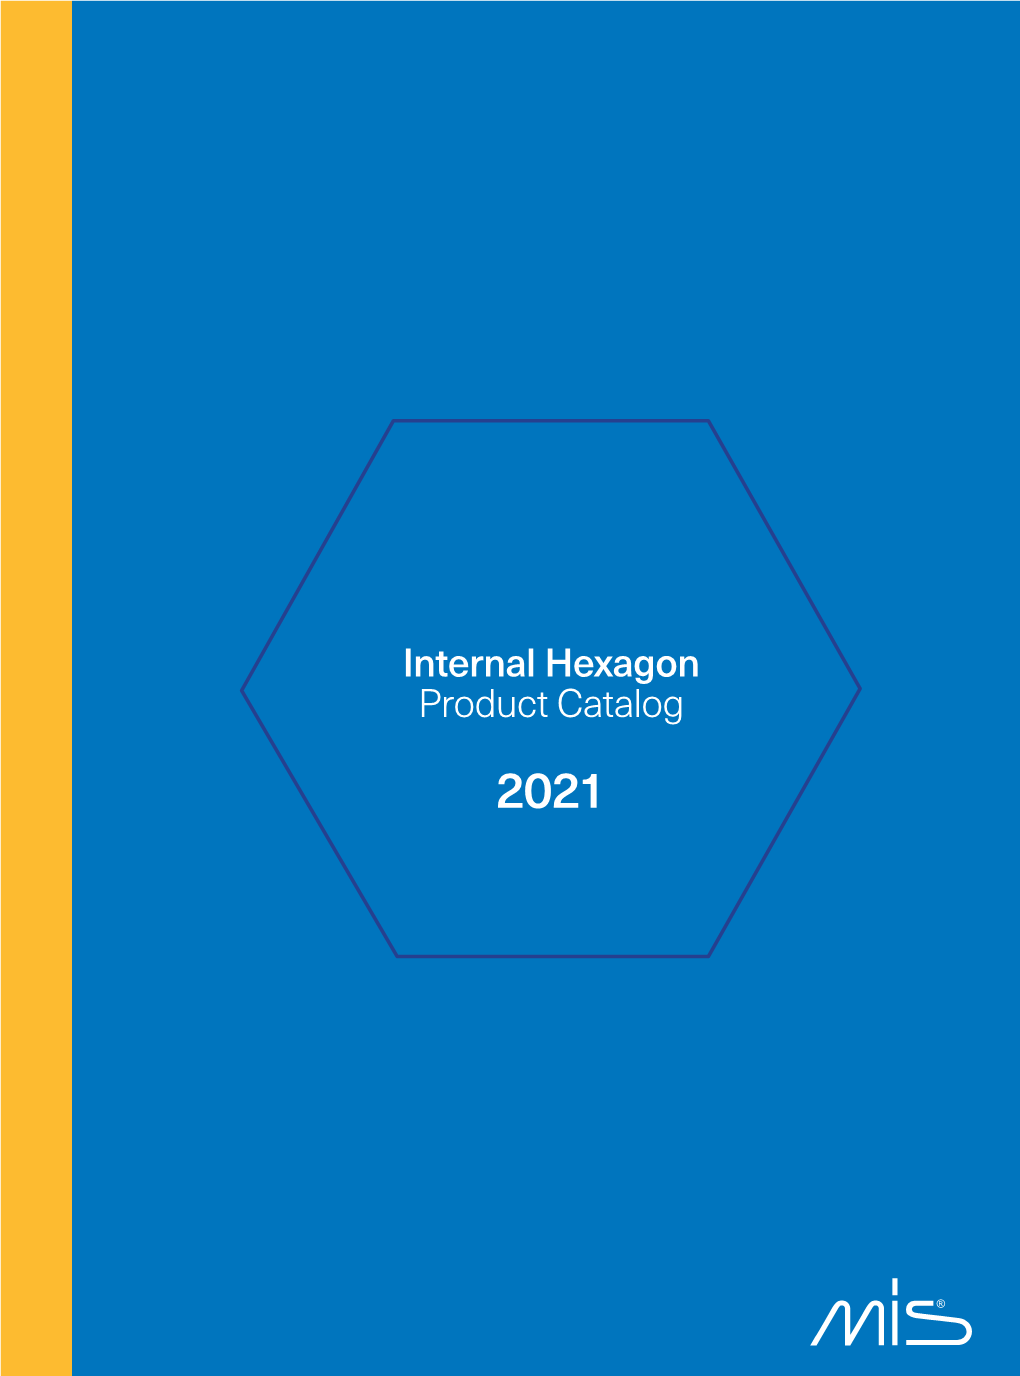 Internal Hexagon Product Catalog 2021 the MIS Vision, to Be the Preferred Choice of Dentists Worldwide by Simplifying Their World, Has Guided the Company on Its Way